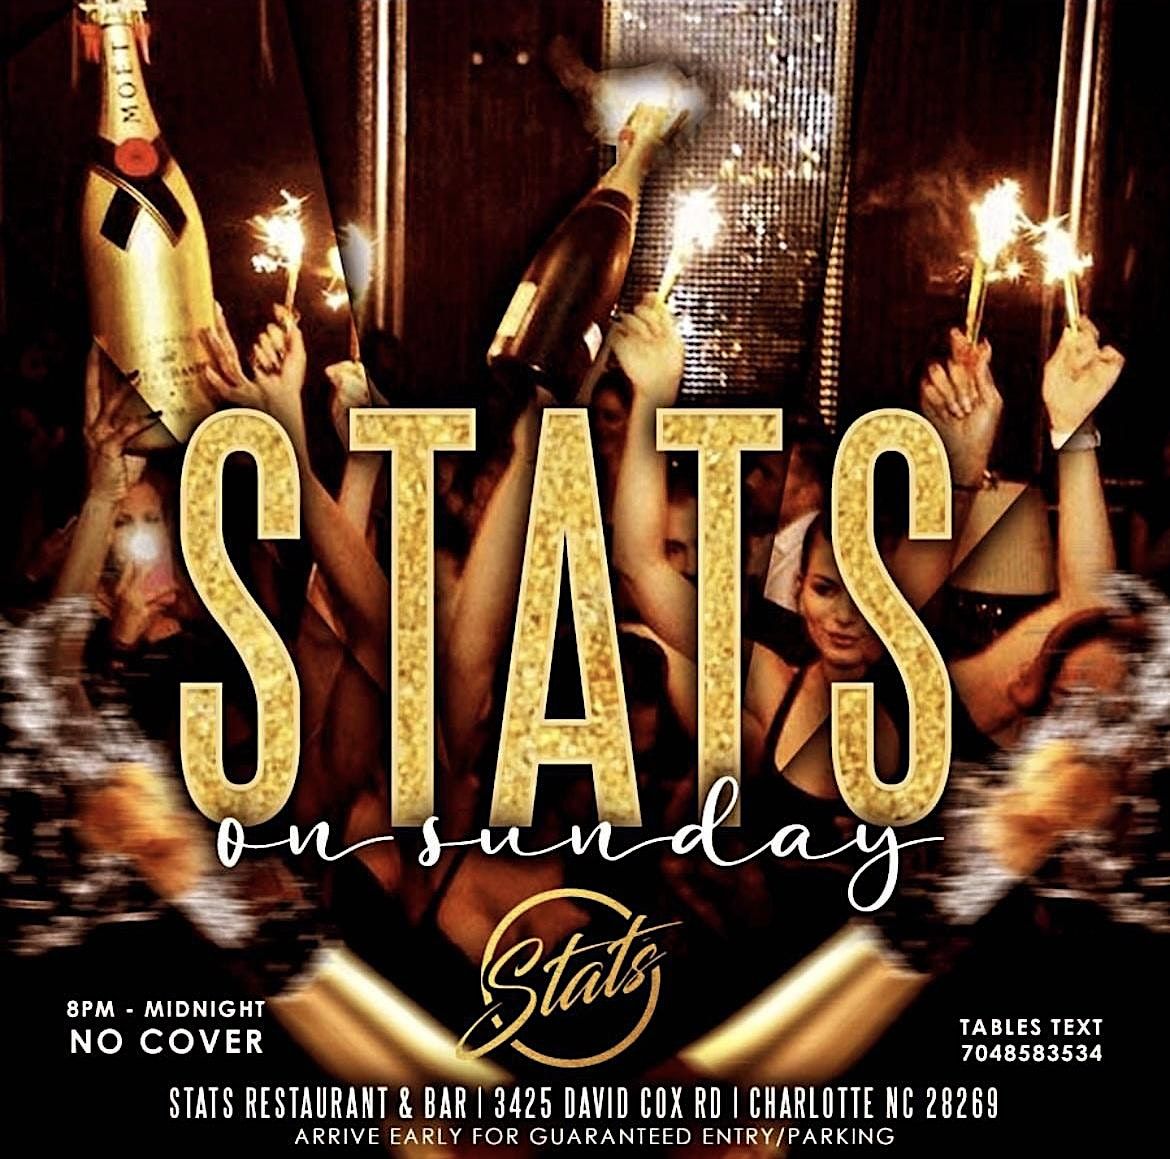 SUNDAY FUN DAY | DJ JOHNNY KAYDEE | HOSTED BY CHEWY |STATS CHARLOTTE